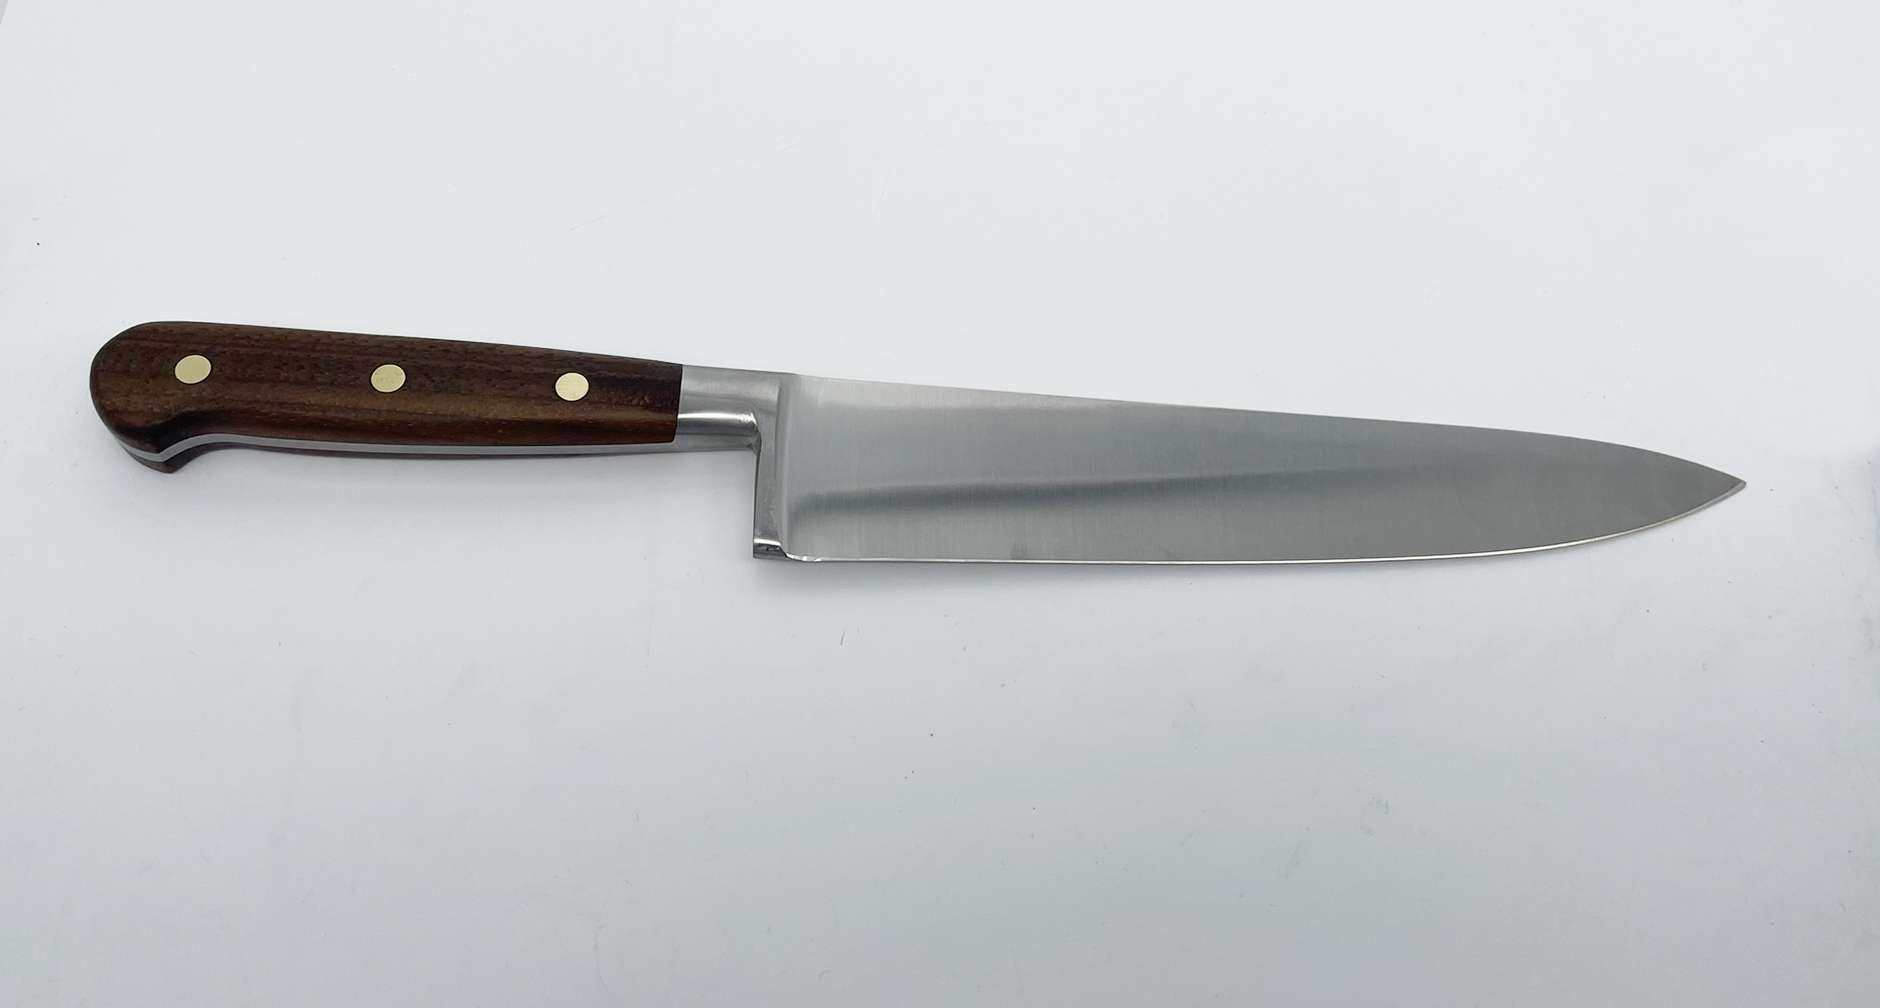 Samuel Staniforth 9 Chef Knife with Curley Birch Handle - VacMaster